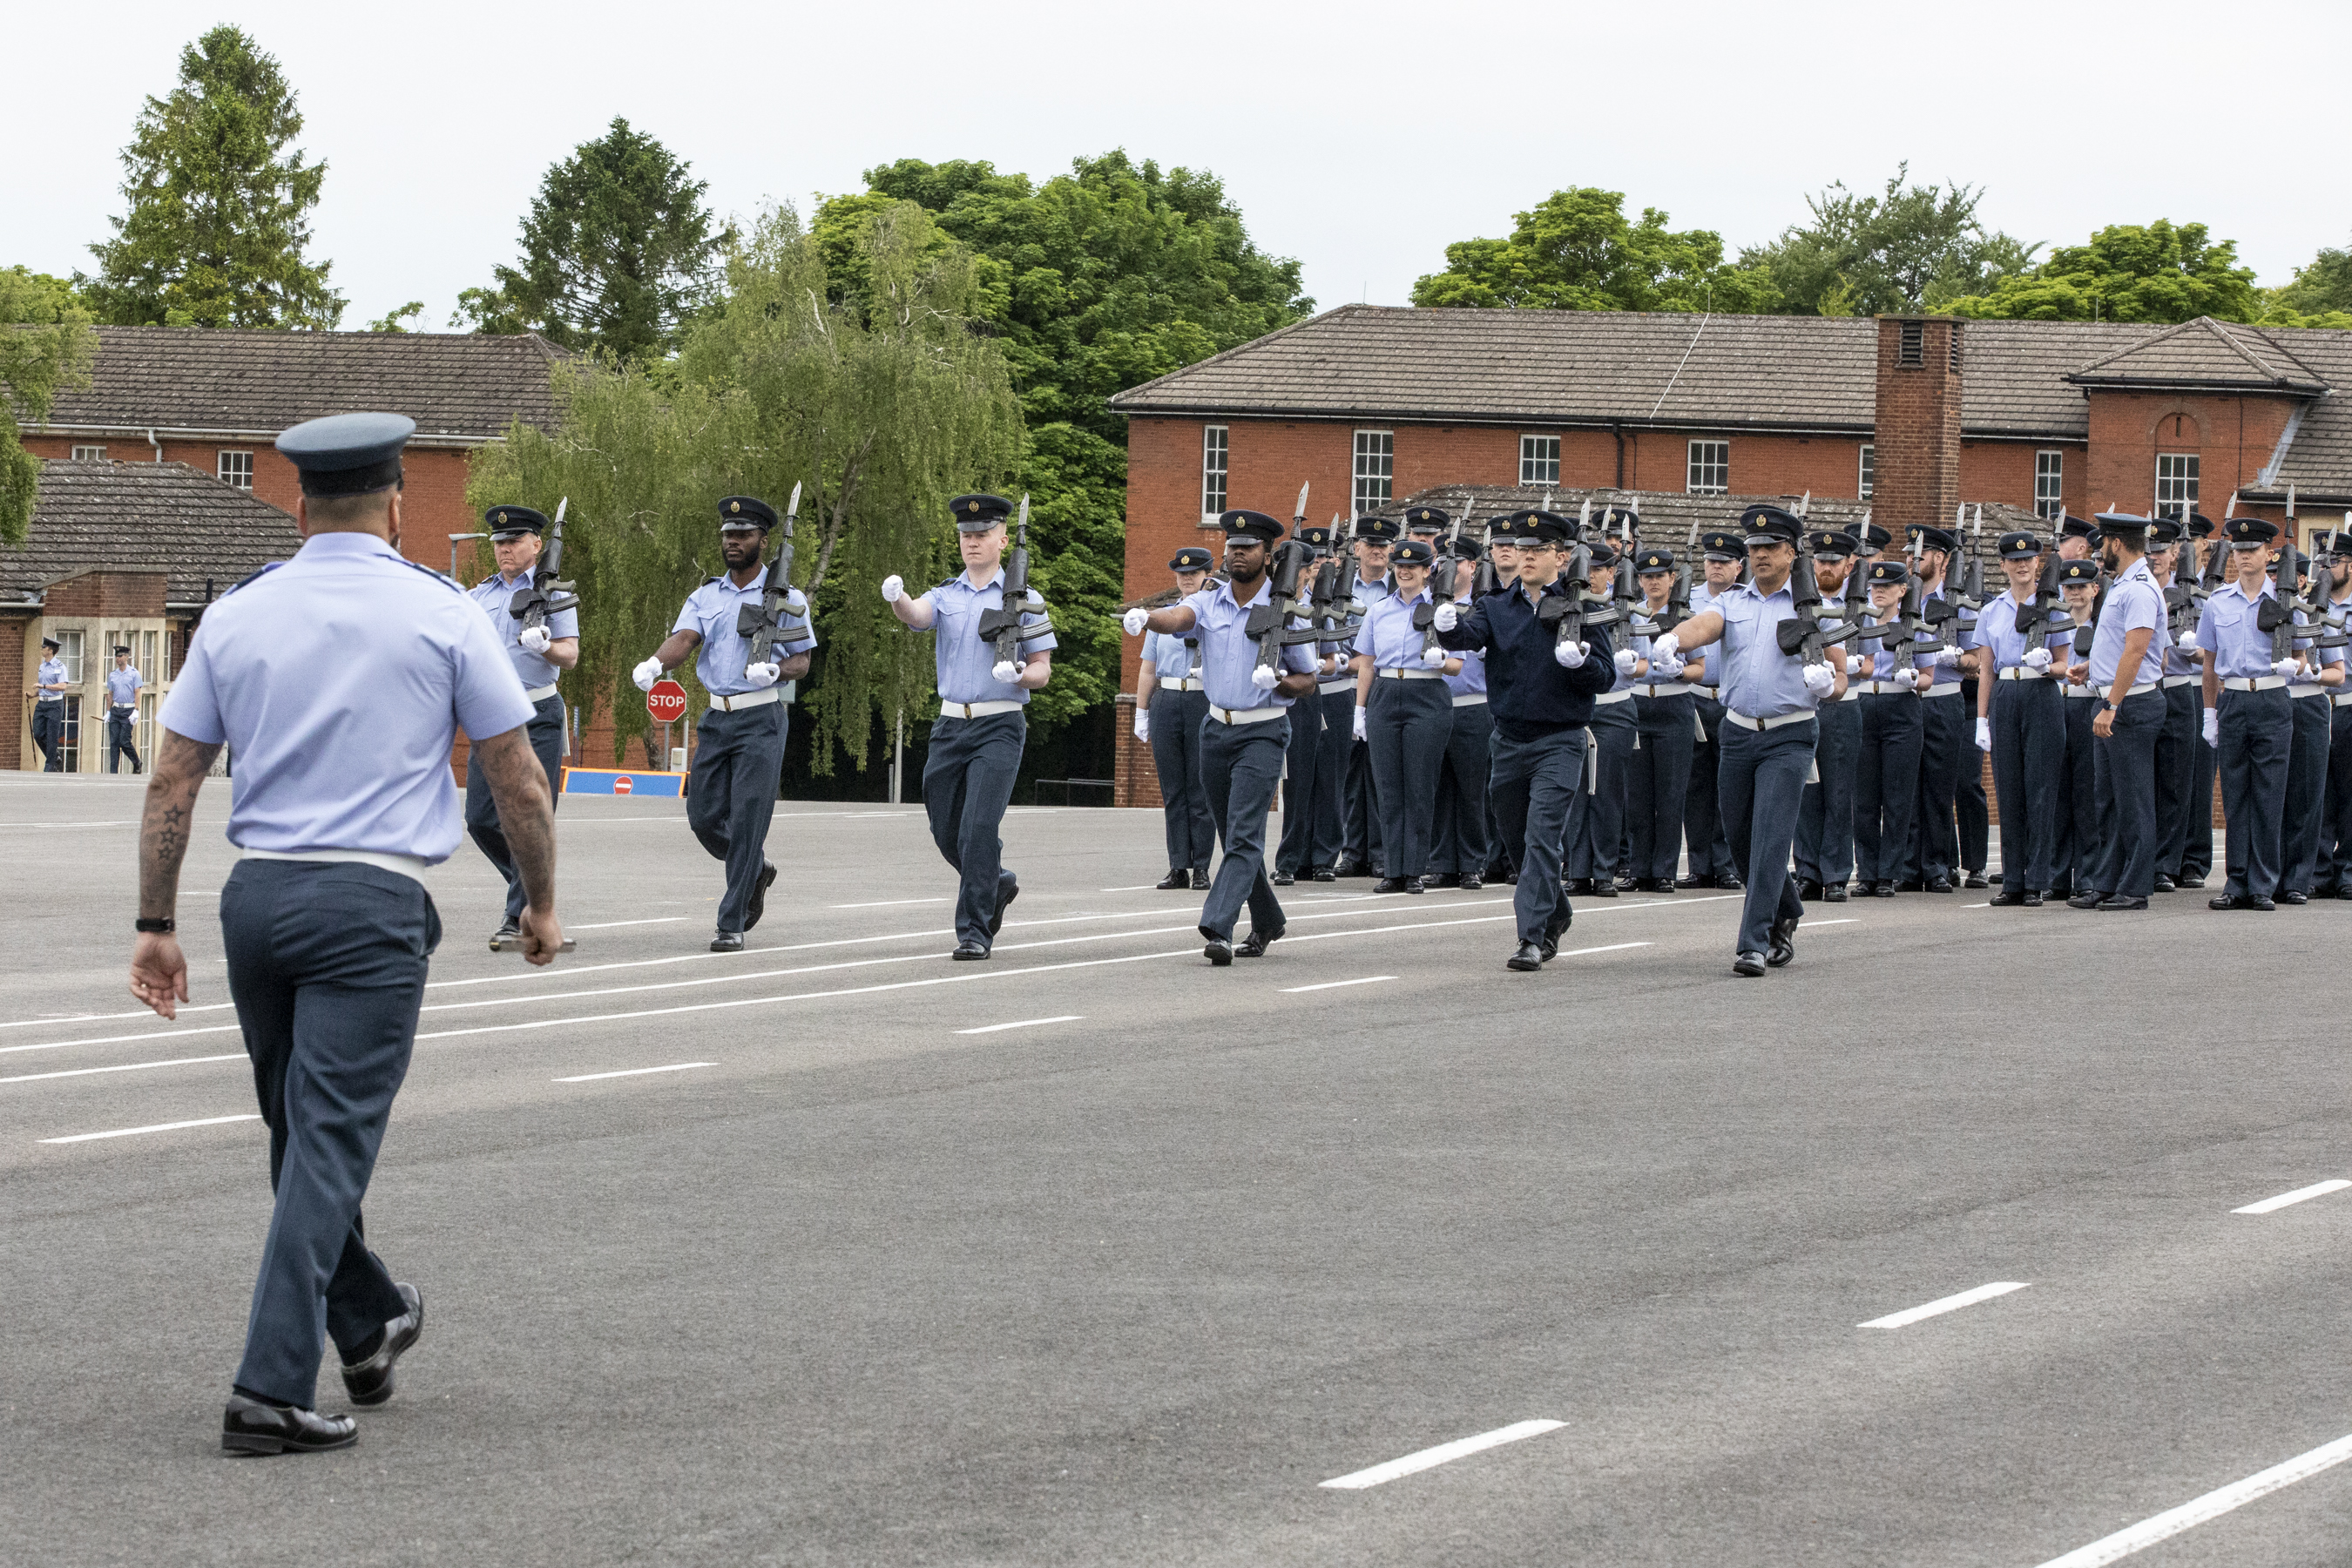 Aviators practise on parade, with rifles.